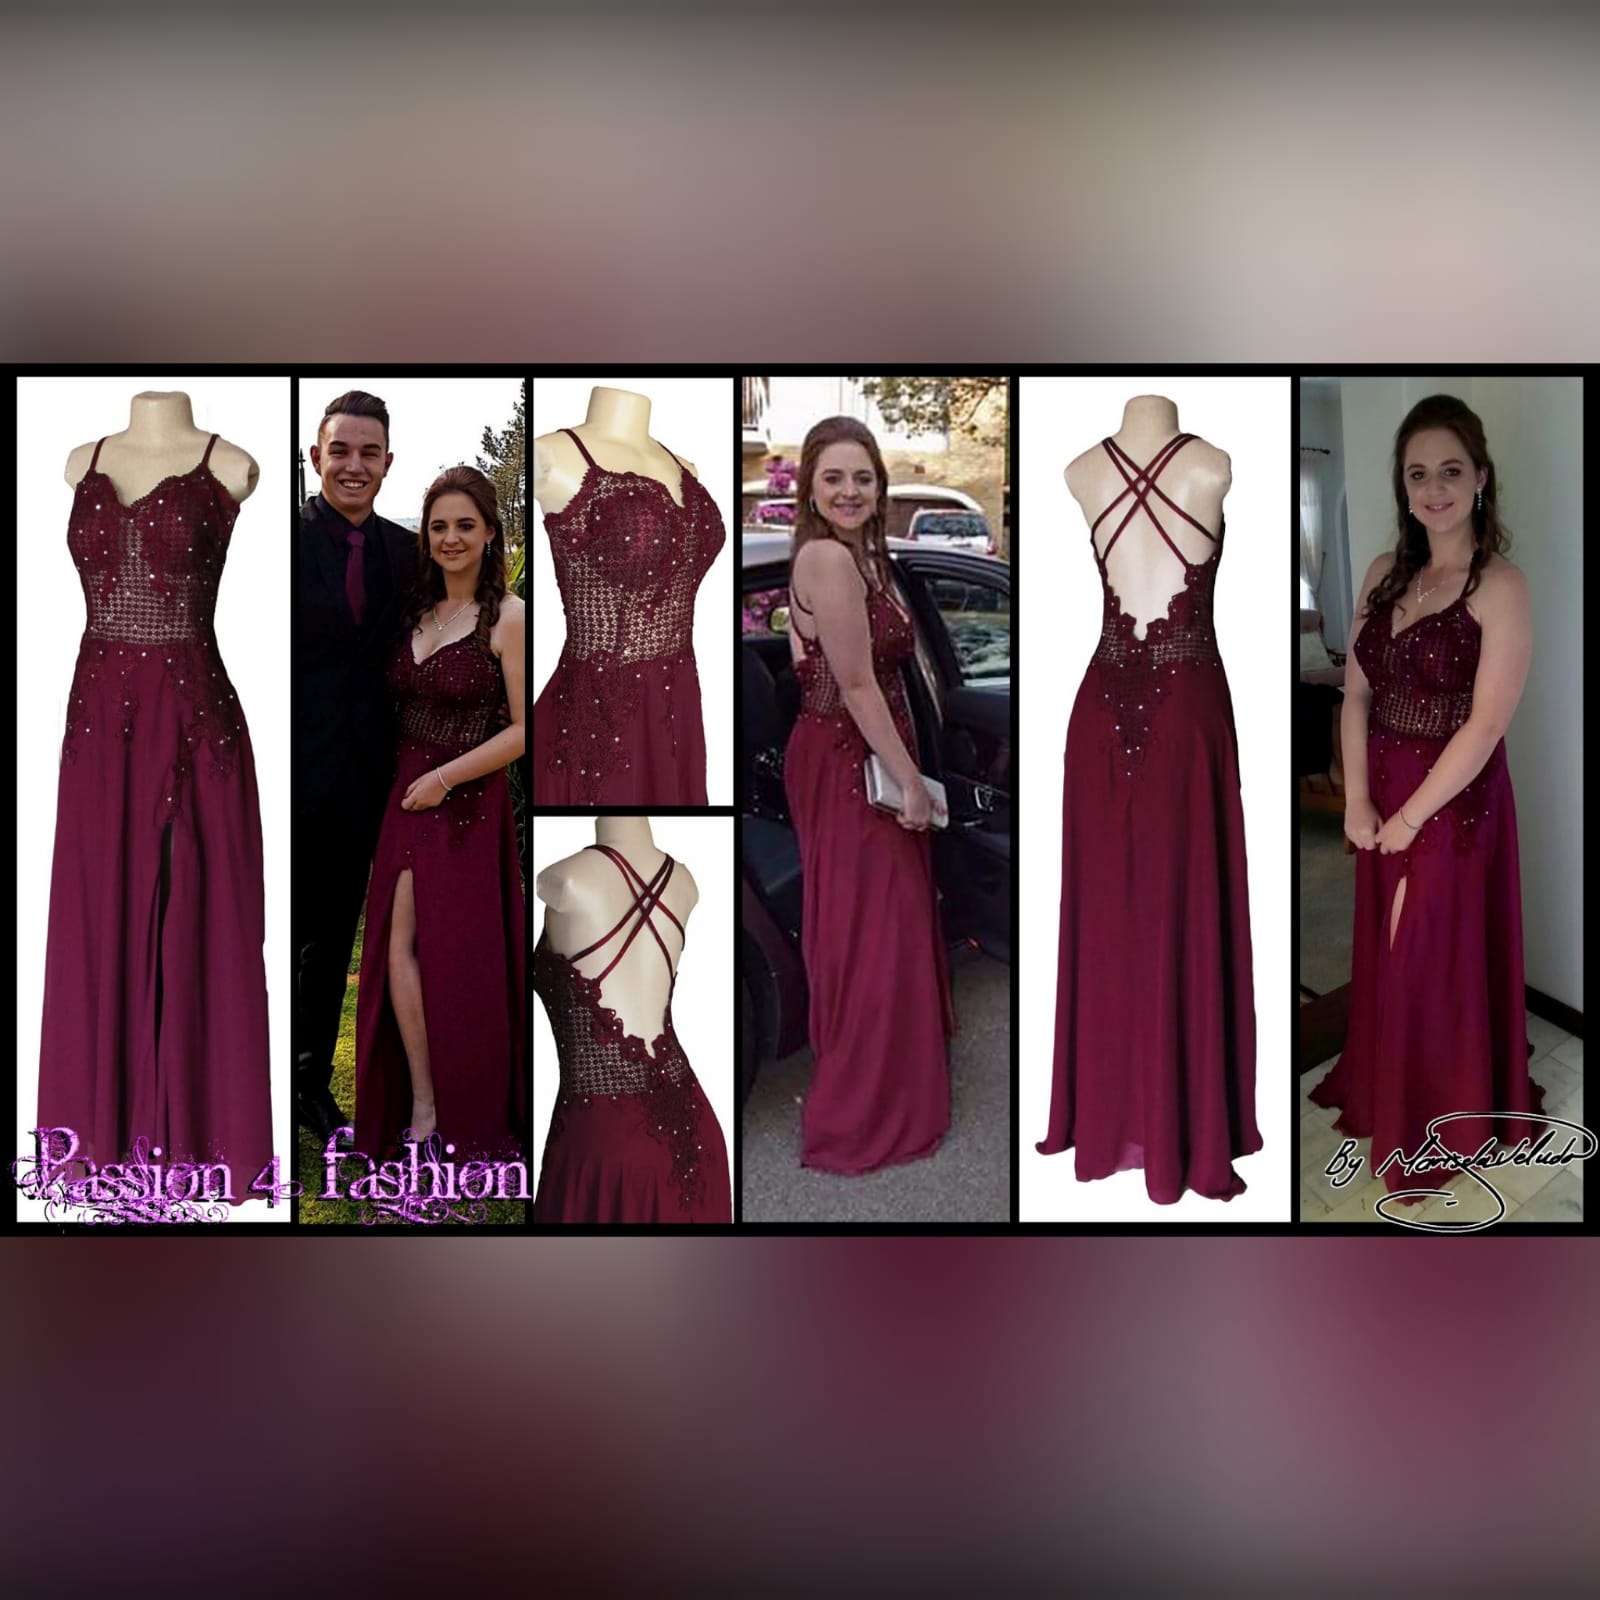 Burgundy chiffon and lace prom dress 5 burgundy chiffon and lace prom dress. Bodice in lace, with a v neckline and v low open back, with double shoulder crossed straps. Bodice detailed with silver beads. Bottom in flowy chiffon with a slit.